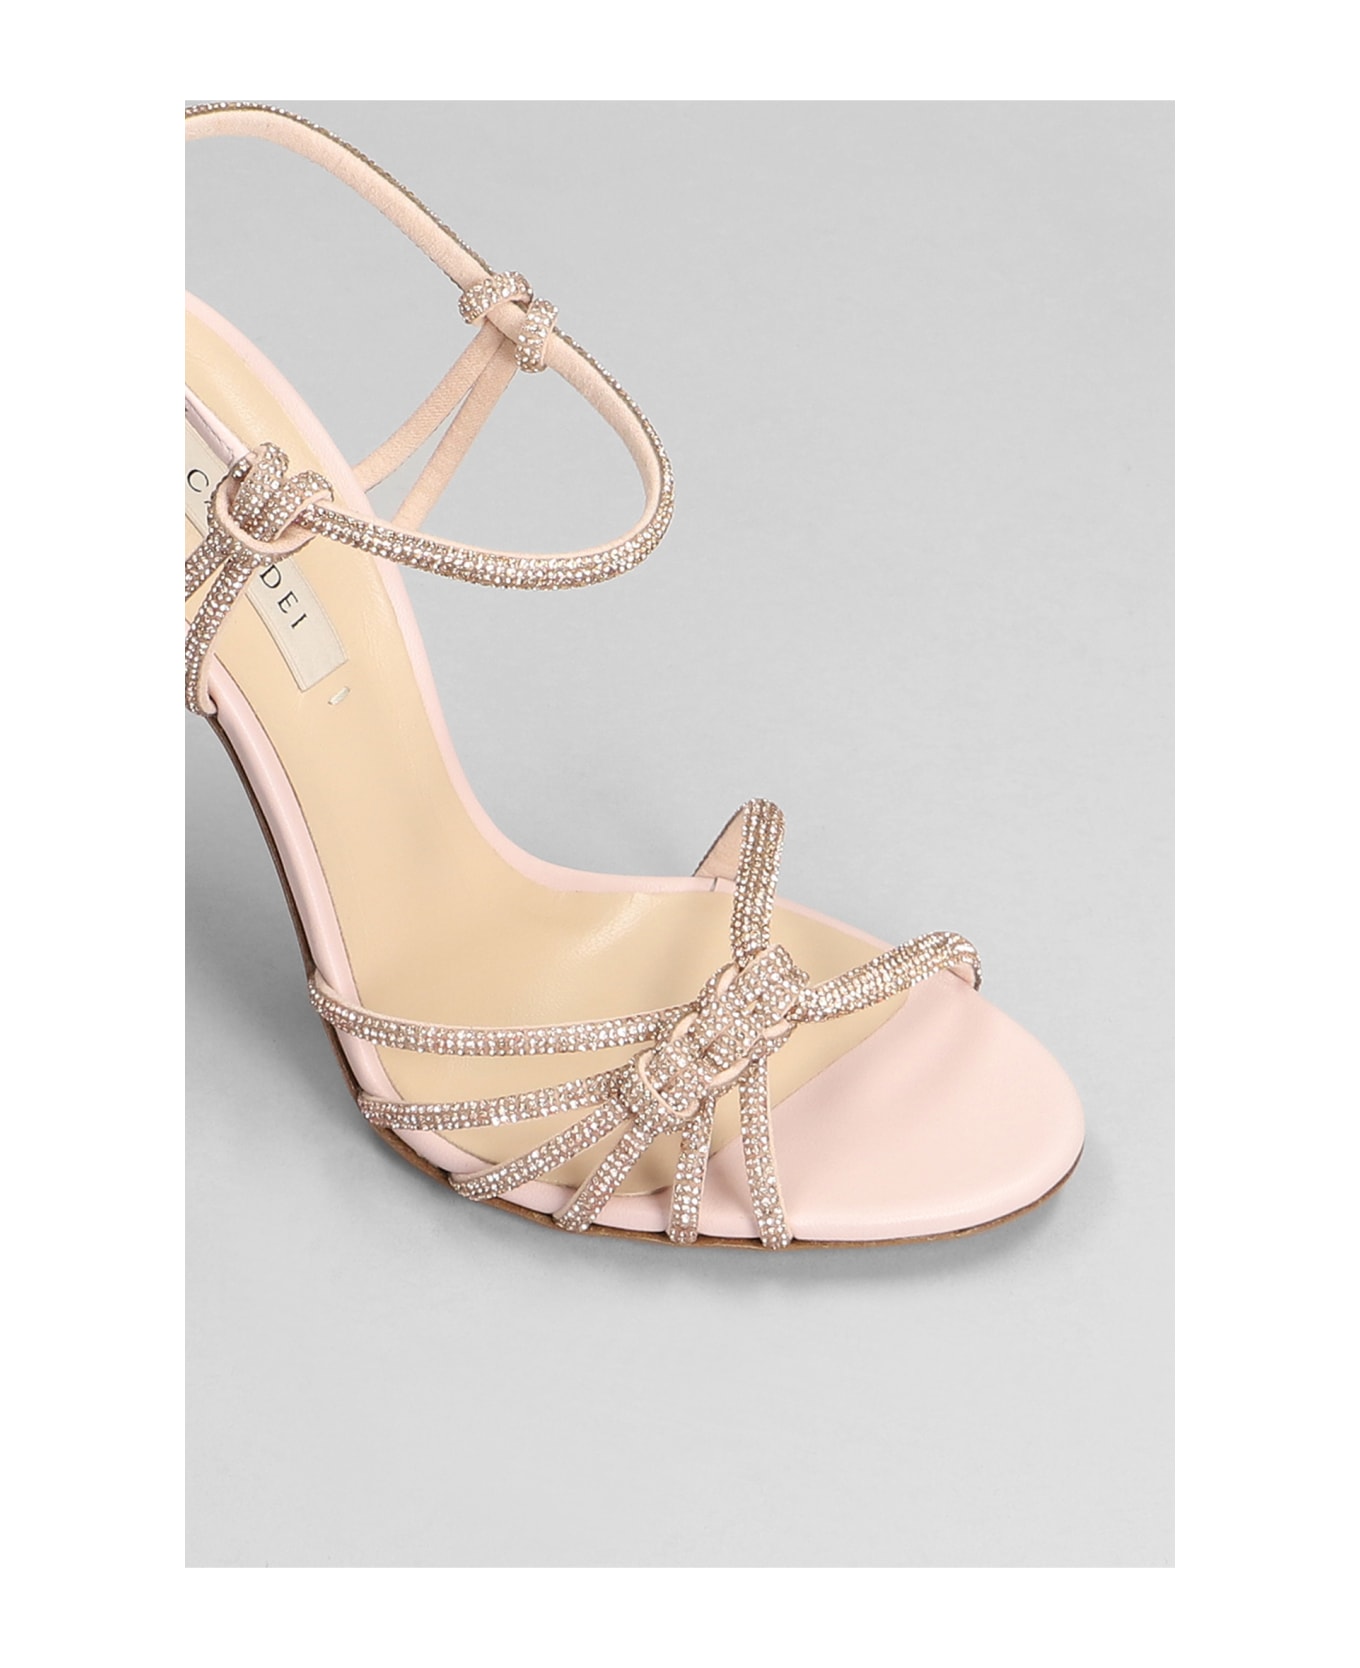 Casadei Sandals In Rose-pink Leather - rose-pink サンダル